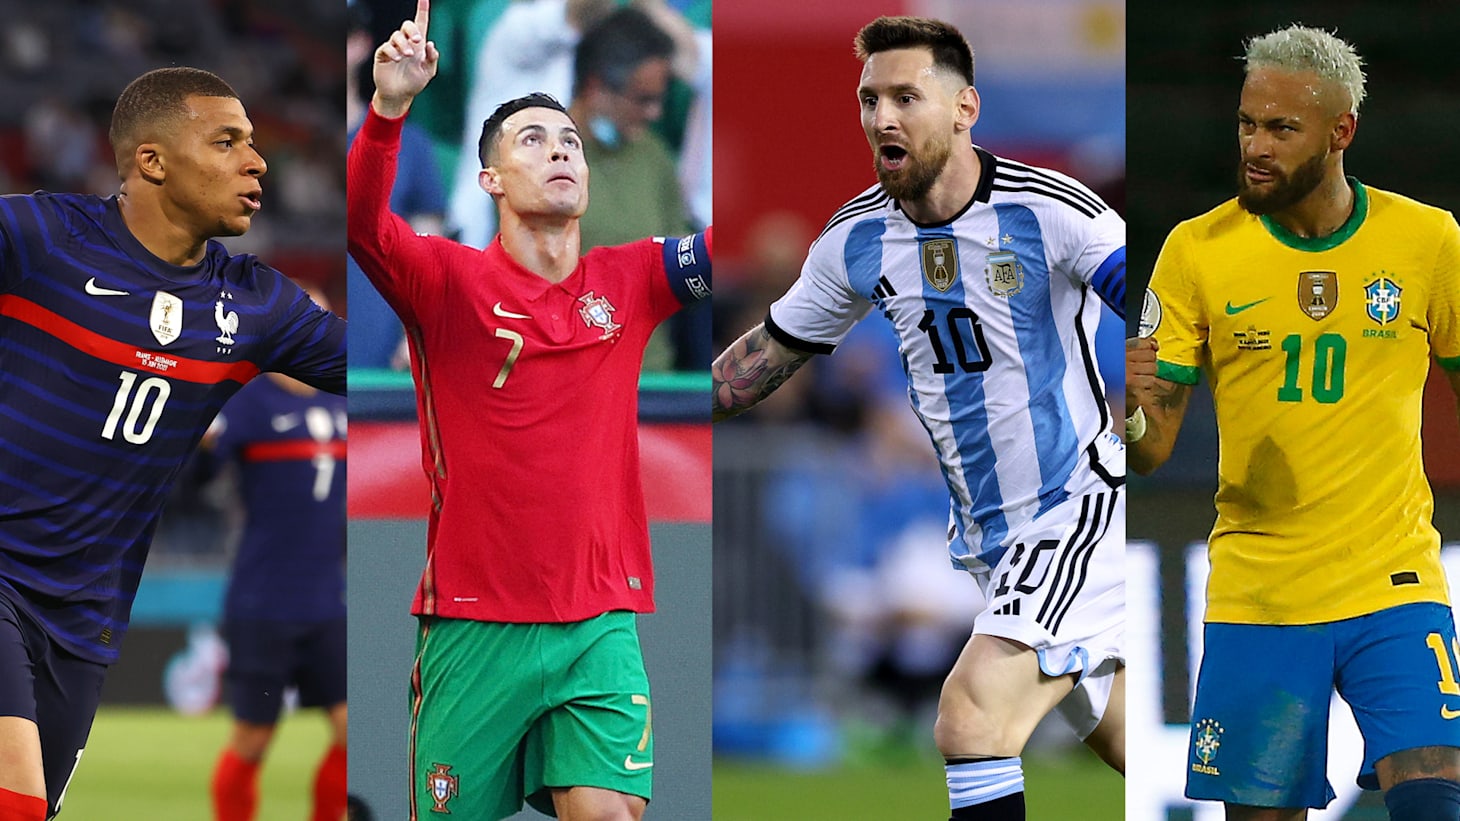 FIFA World Cup 2022: Messi, Ronaldo, and Neymar's last chance at